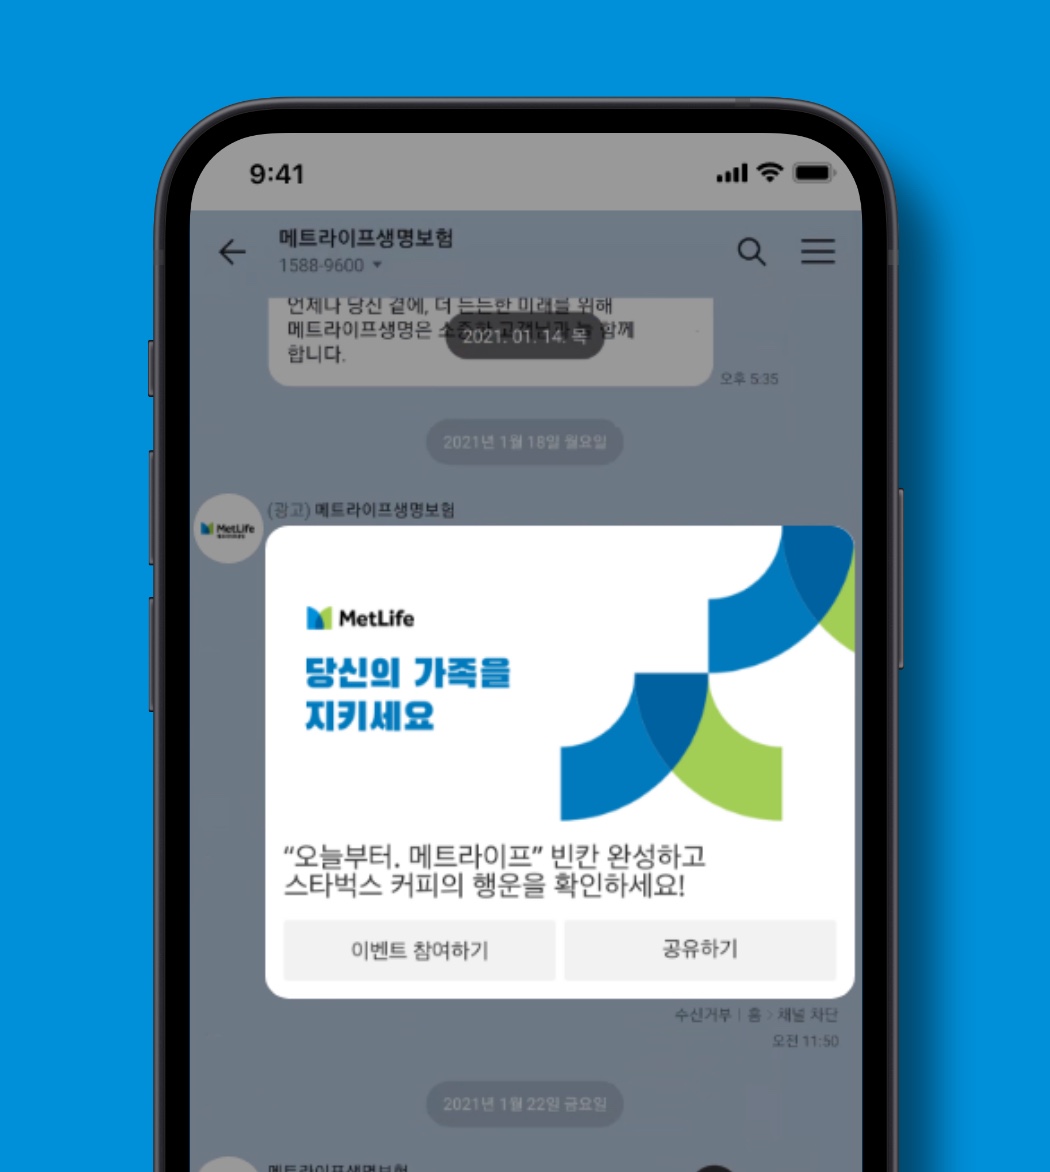 Phone screen showing branded communication with graphic on Kakao.